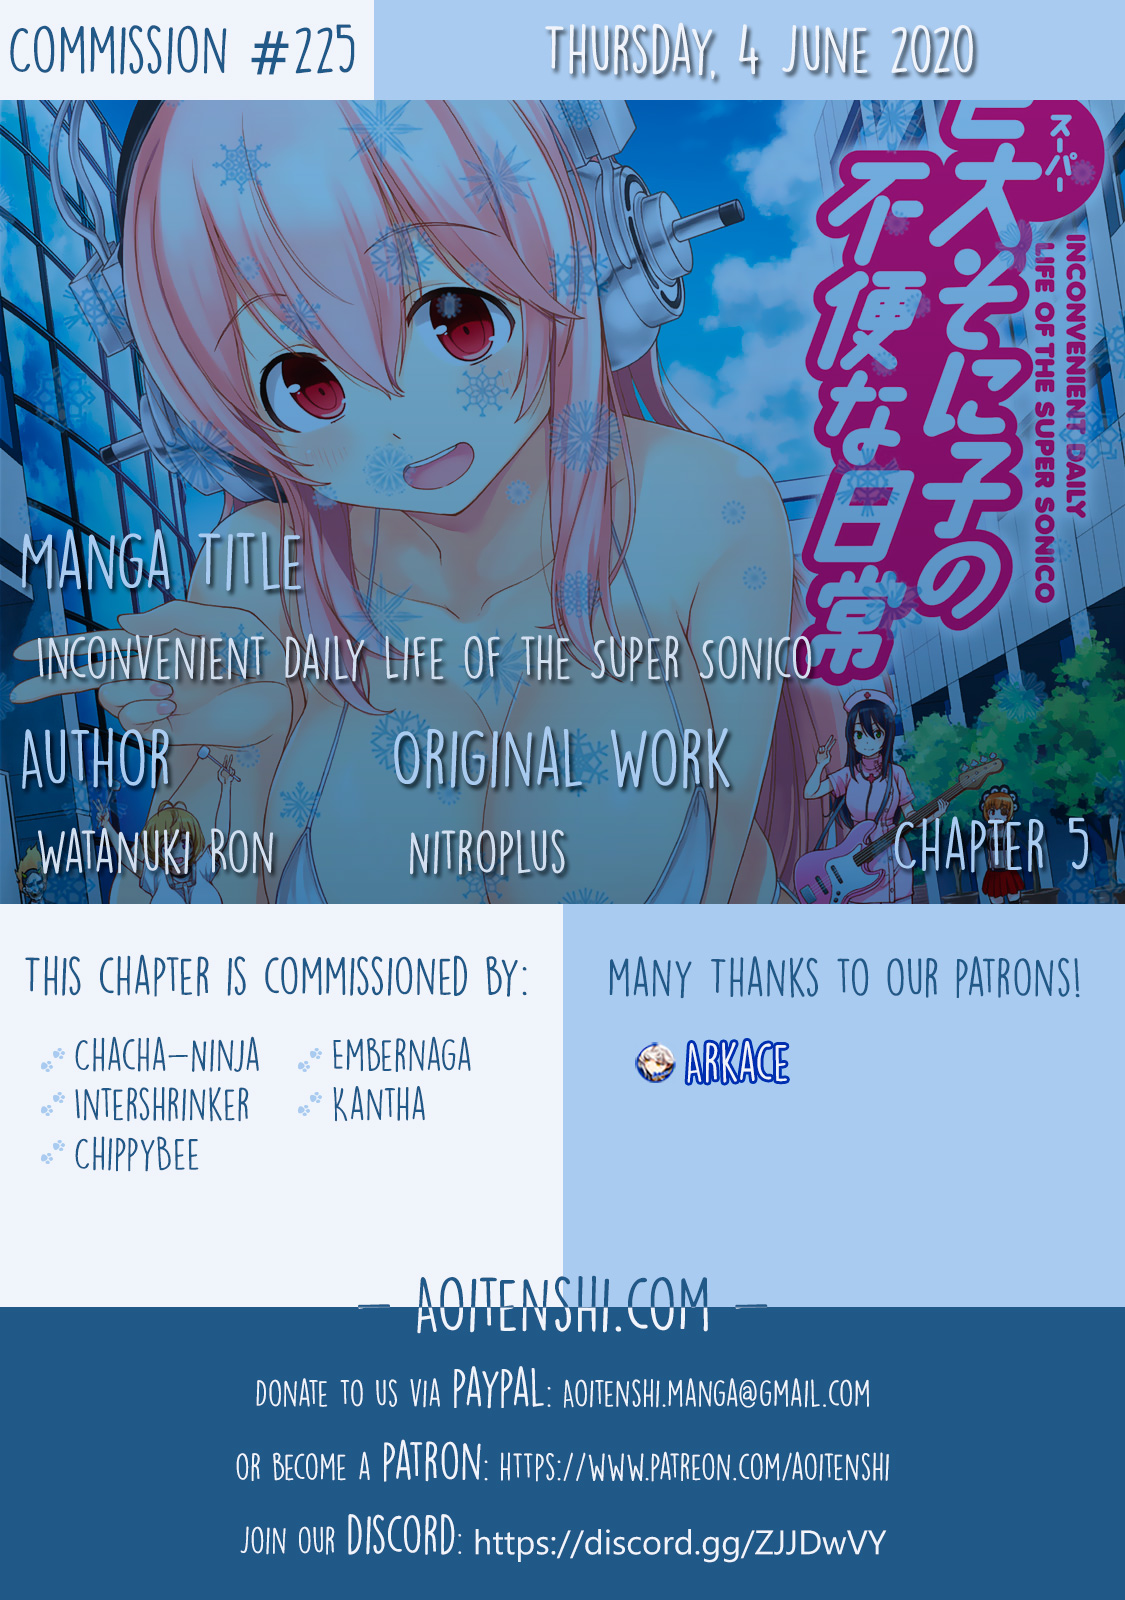 Inconvenient Daily Life of the Super Sonico!!! Vol. 1 Ch. 5 Dominic and the Boy